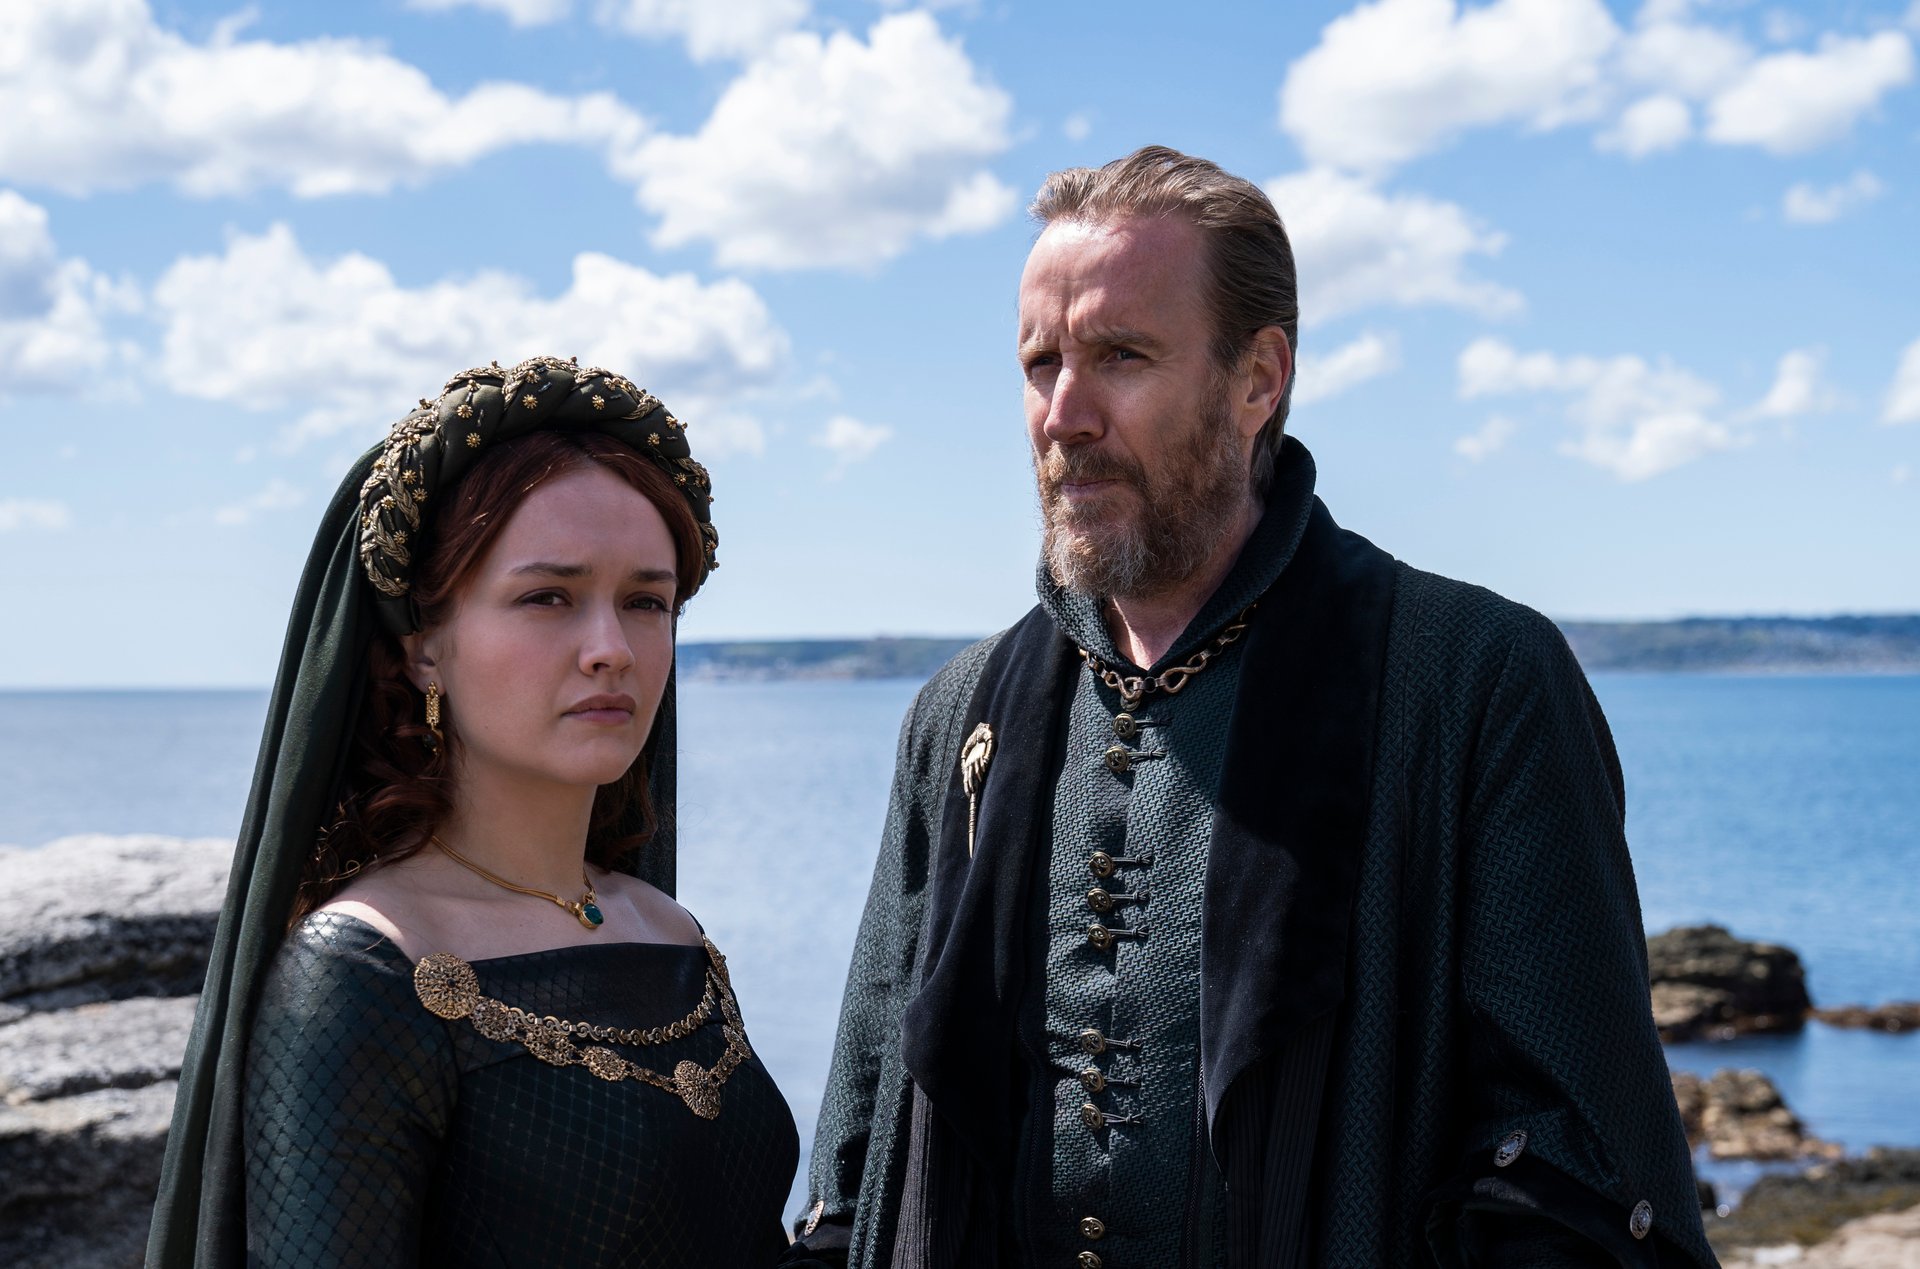 Olivia Cooke as Alicent Hightower and Rhys Ifans as Otto Hightower in 'House of the Dragon,' one of the best shows coming out in August 2022. They're standing side by side in front of a blue sky and the ocean.